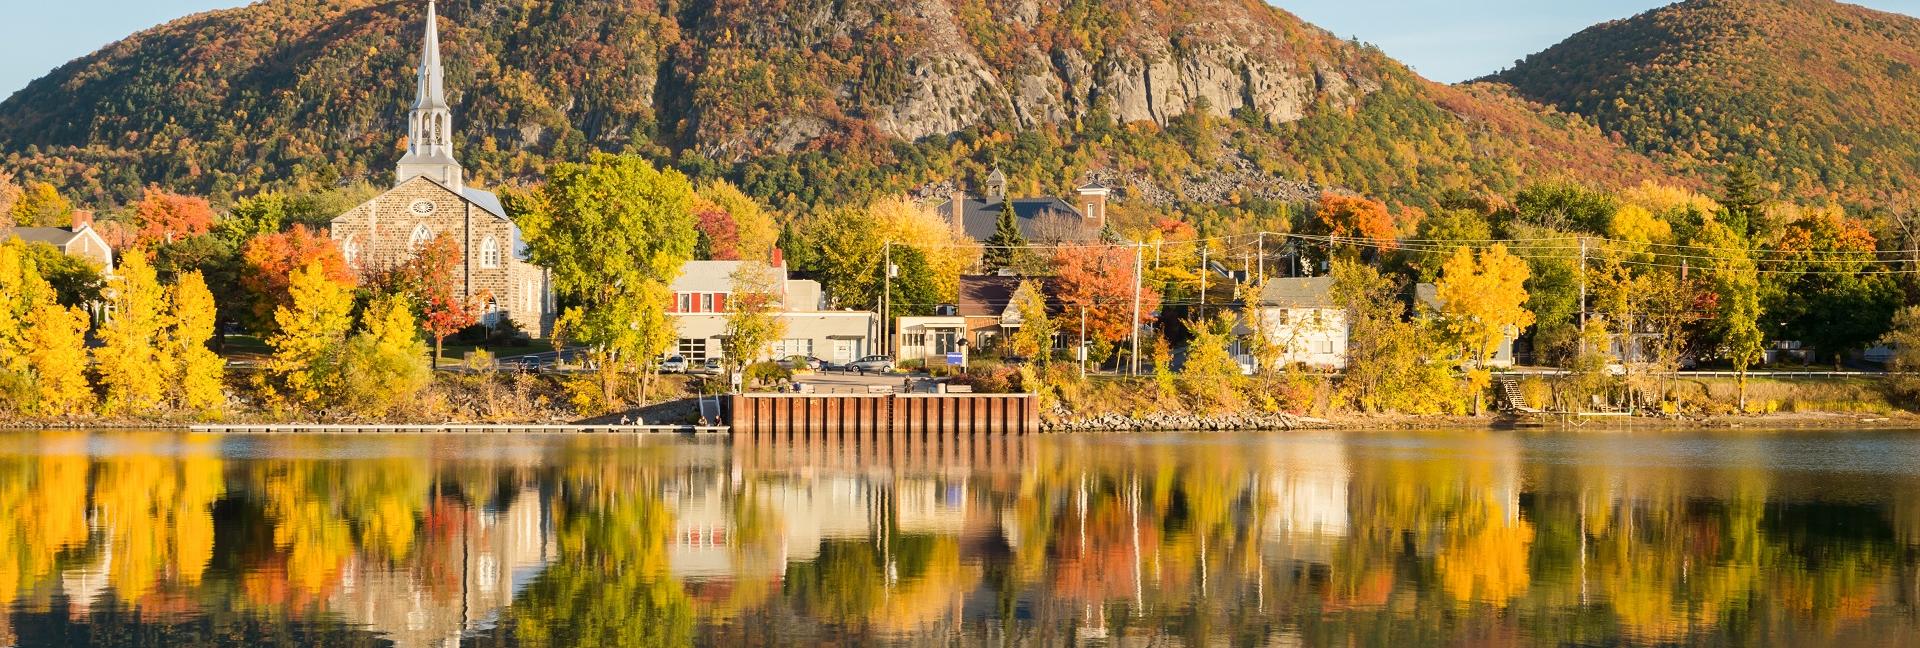 Image of Mont Saint-Hillaire in Fall from Richelieu River banks in Beloeil